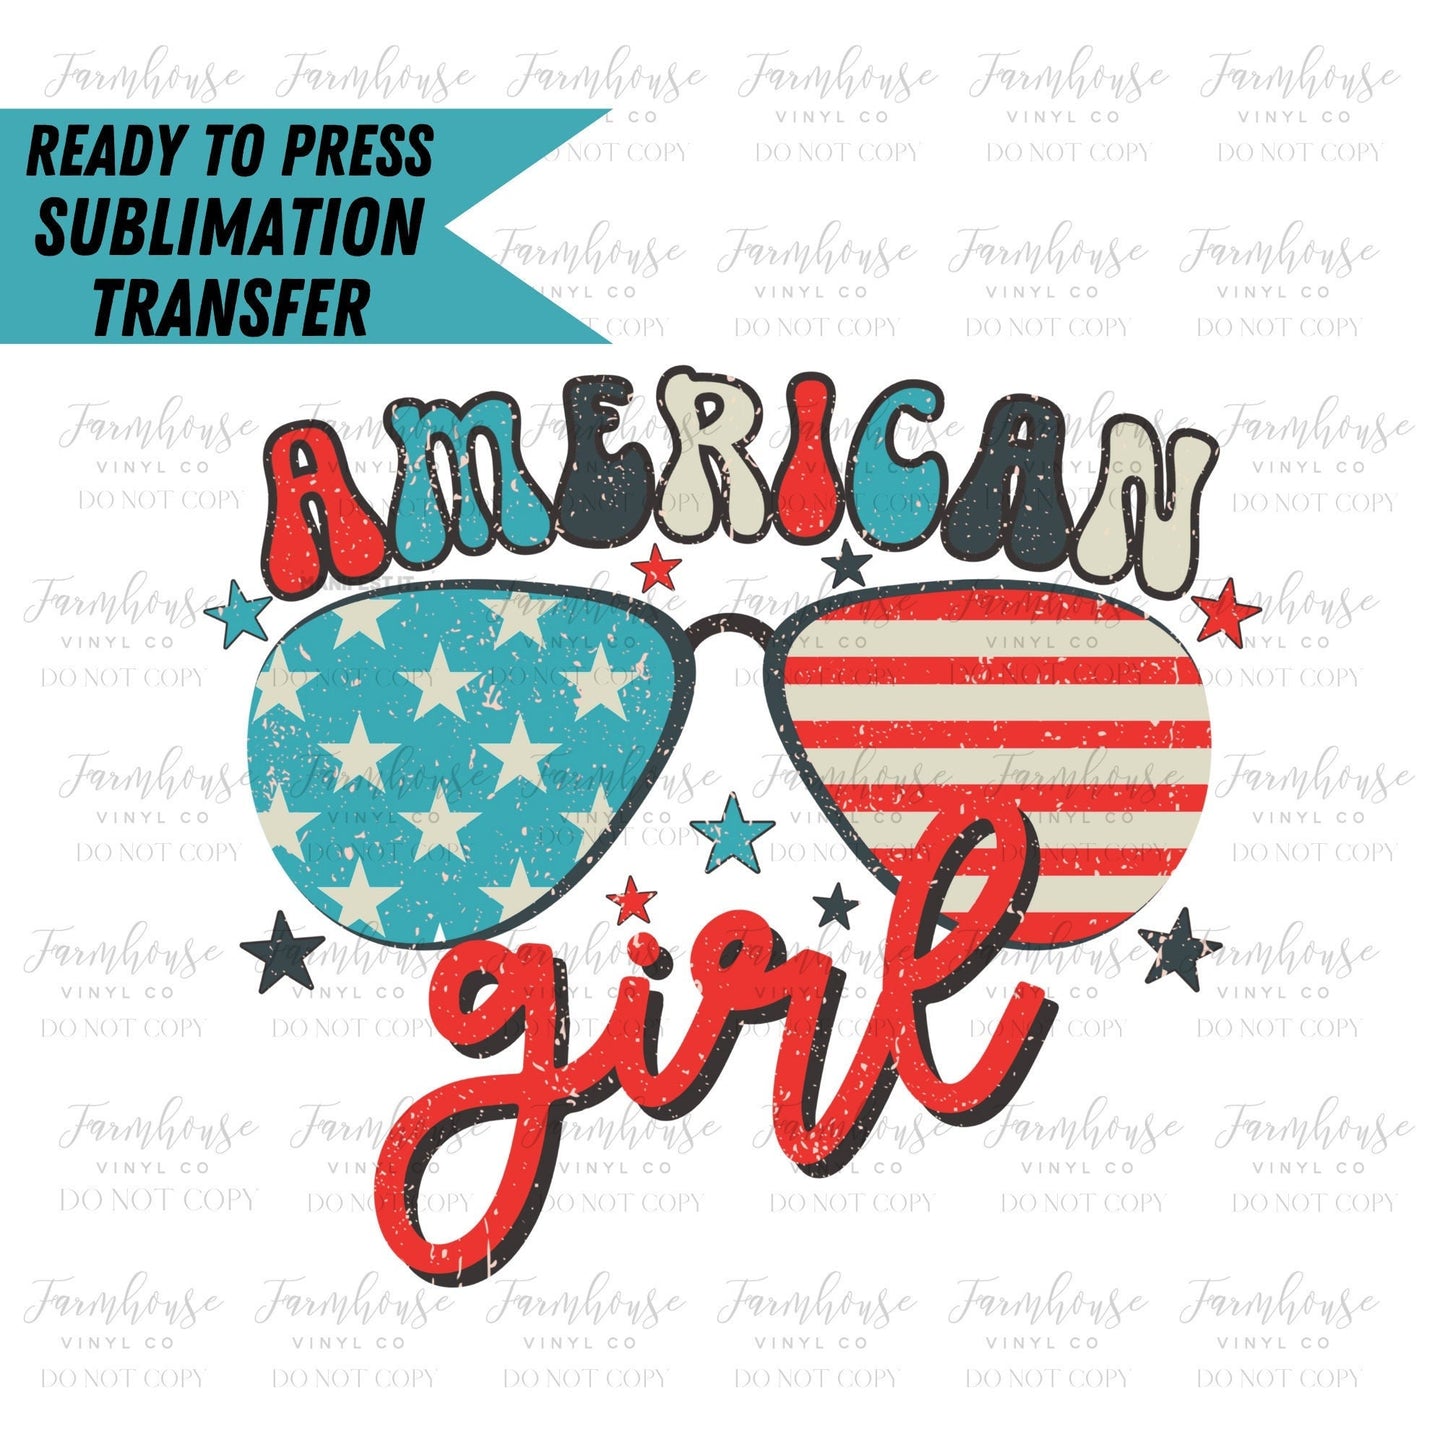 Retro 4th of July American Boy, Ready to Press Sublimation Transfer, Sublimation Transfers, Heat Transfer, 4th of July, American Girl Boy - Farmhouse Vinyl Co